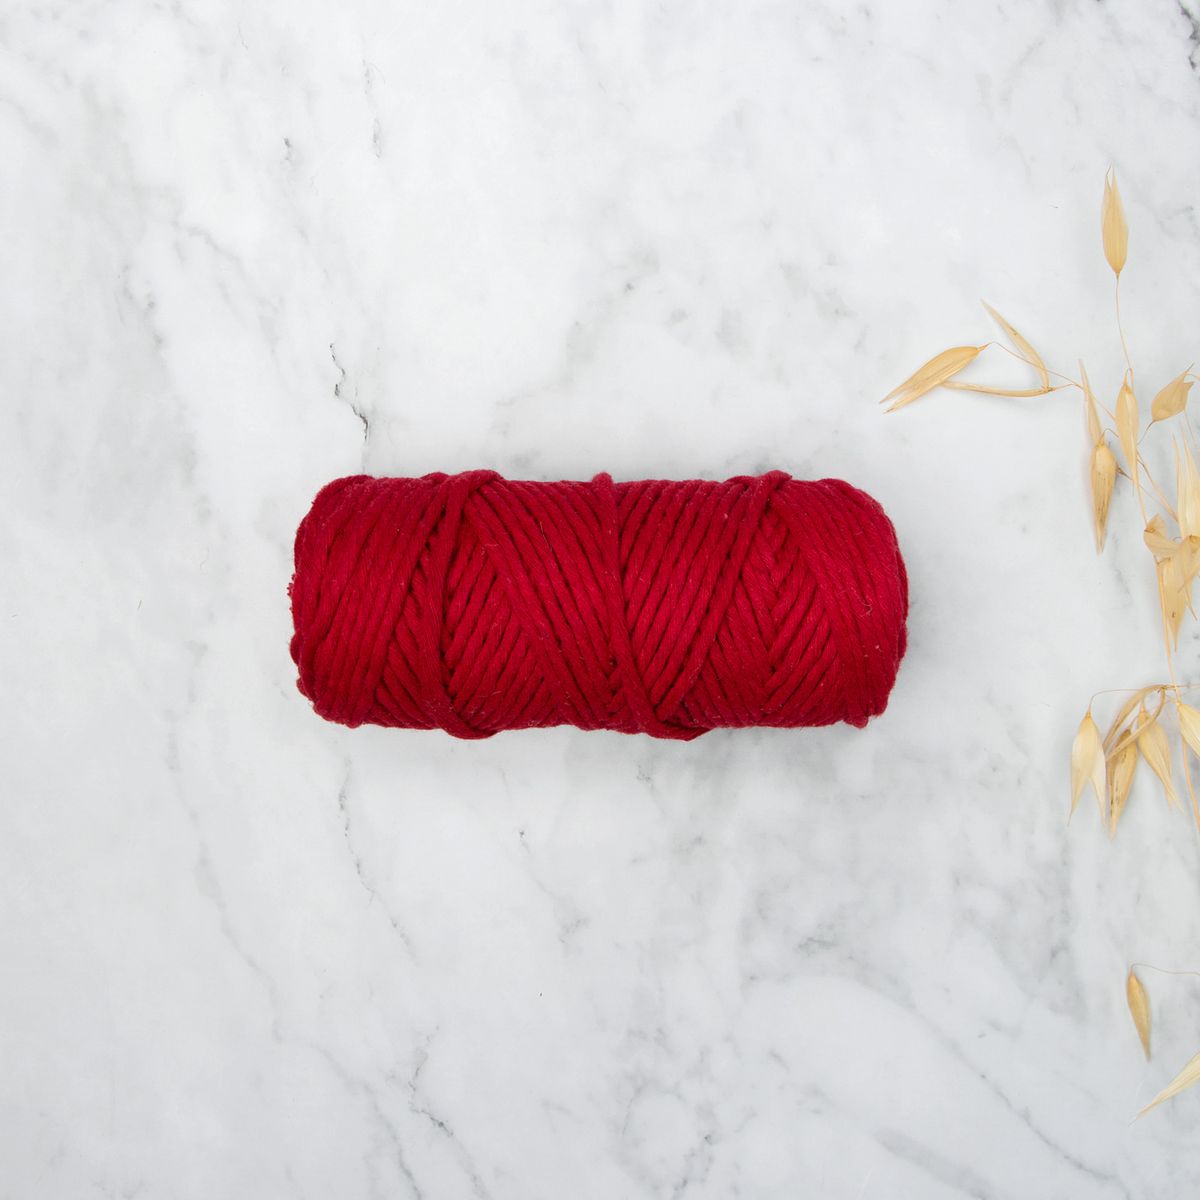 3 mm Recycled Cotton String 200gr / 7oz Cherry